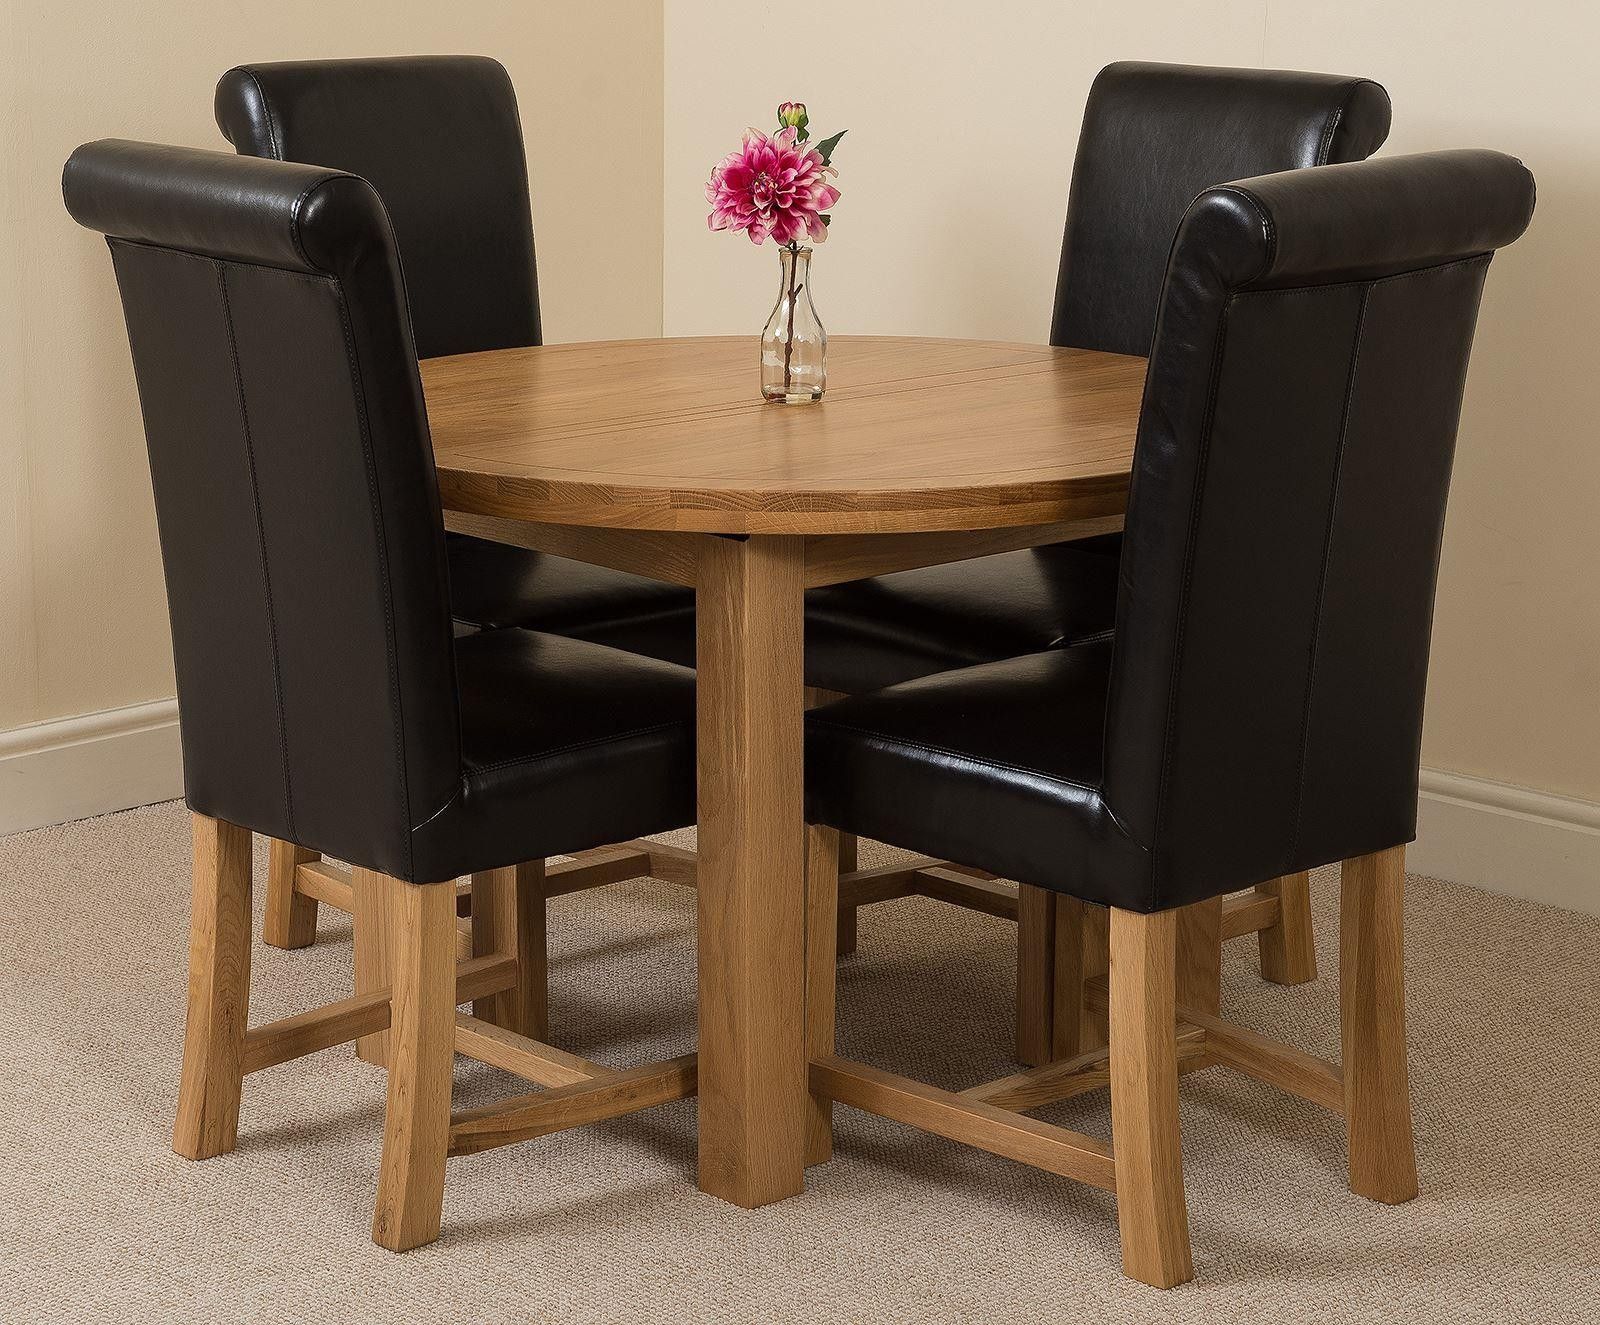 Edmonton Solid Oak Extending Oval Dining Table With 4 Washington Dining Intended For Extendable Oval Patio Dining Sets (View 2 of 15)